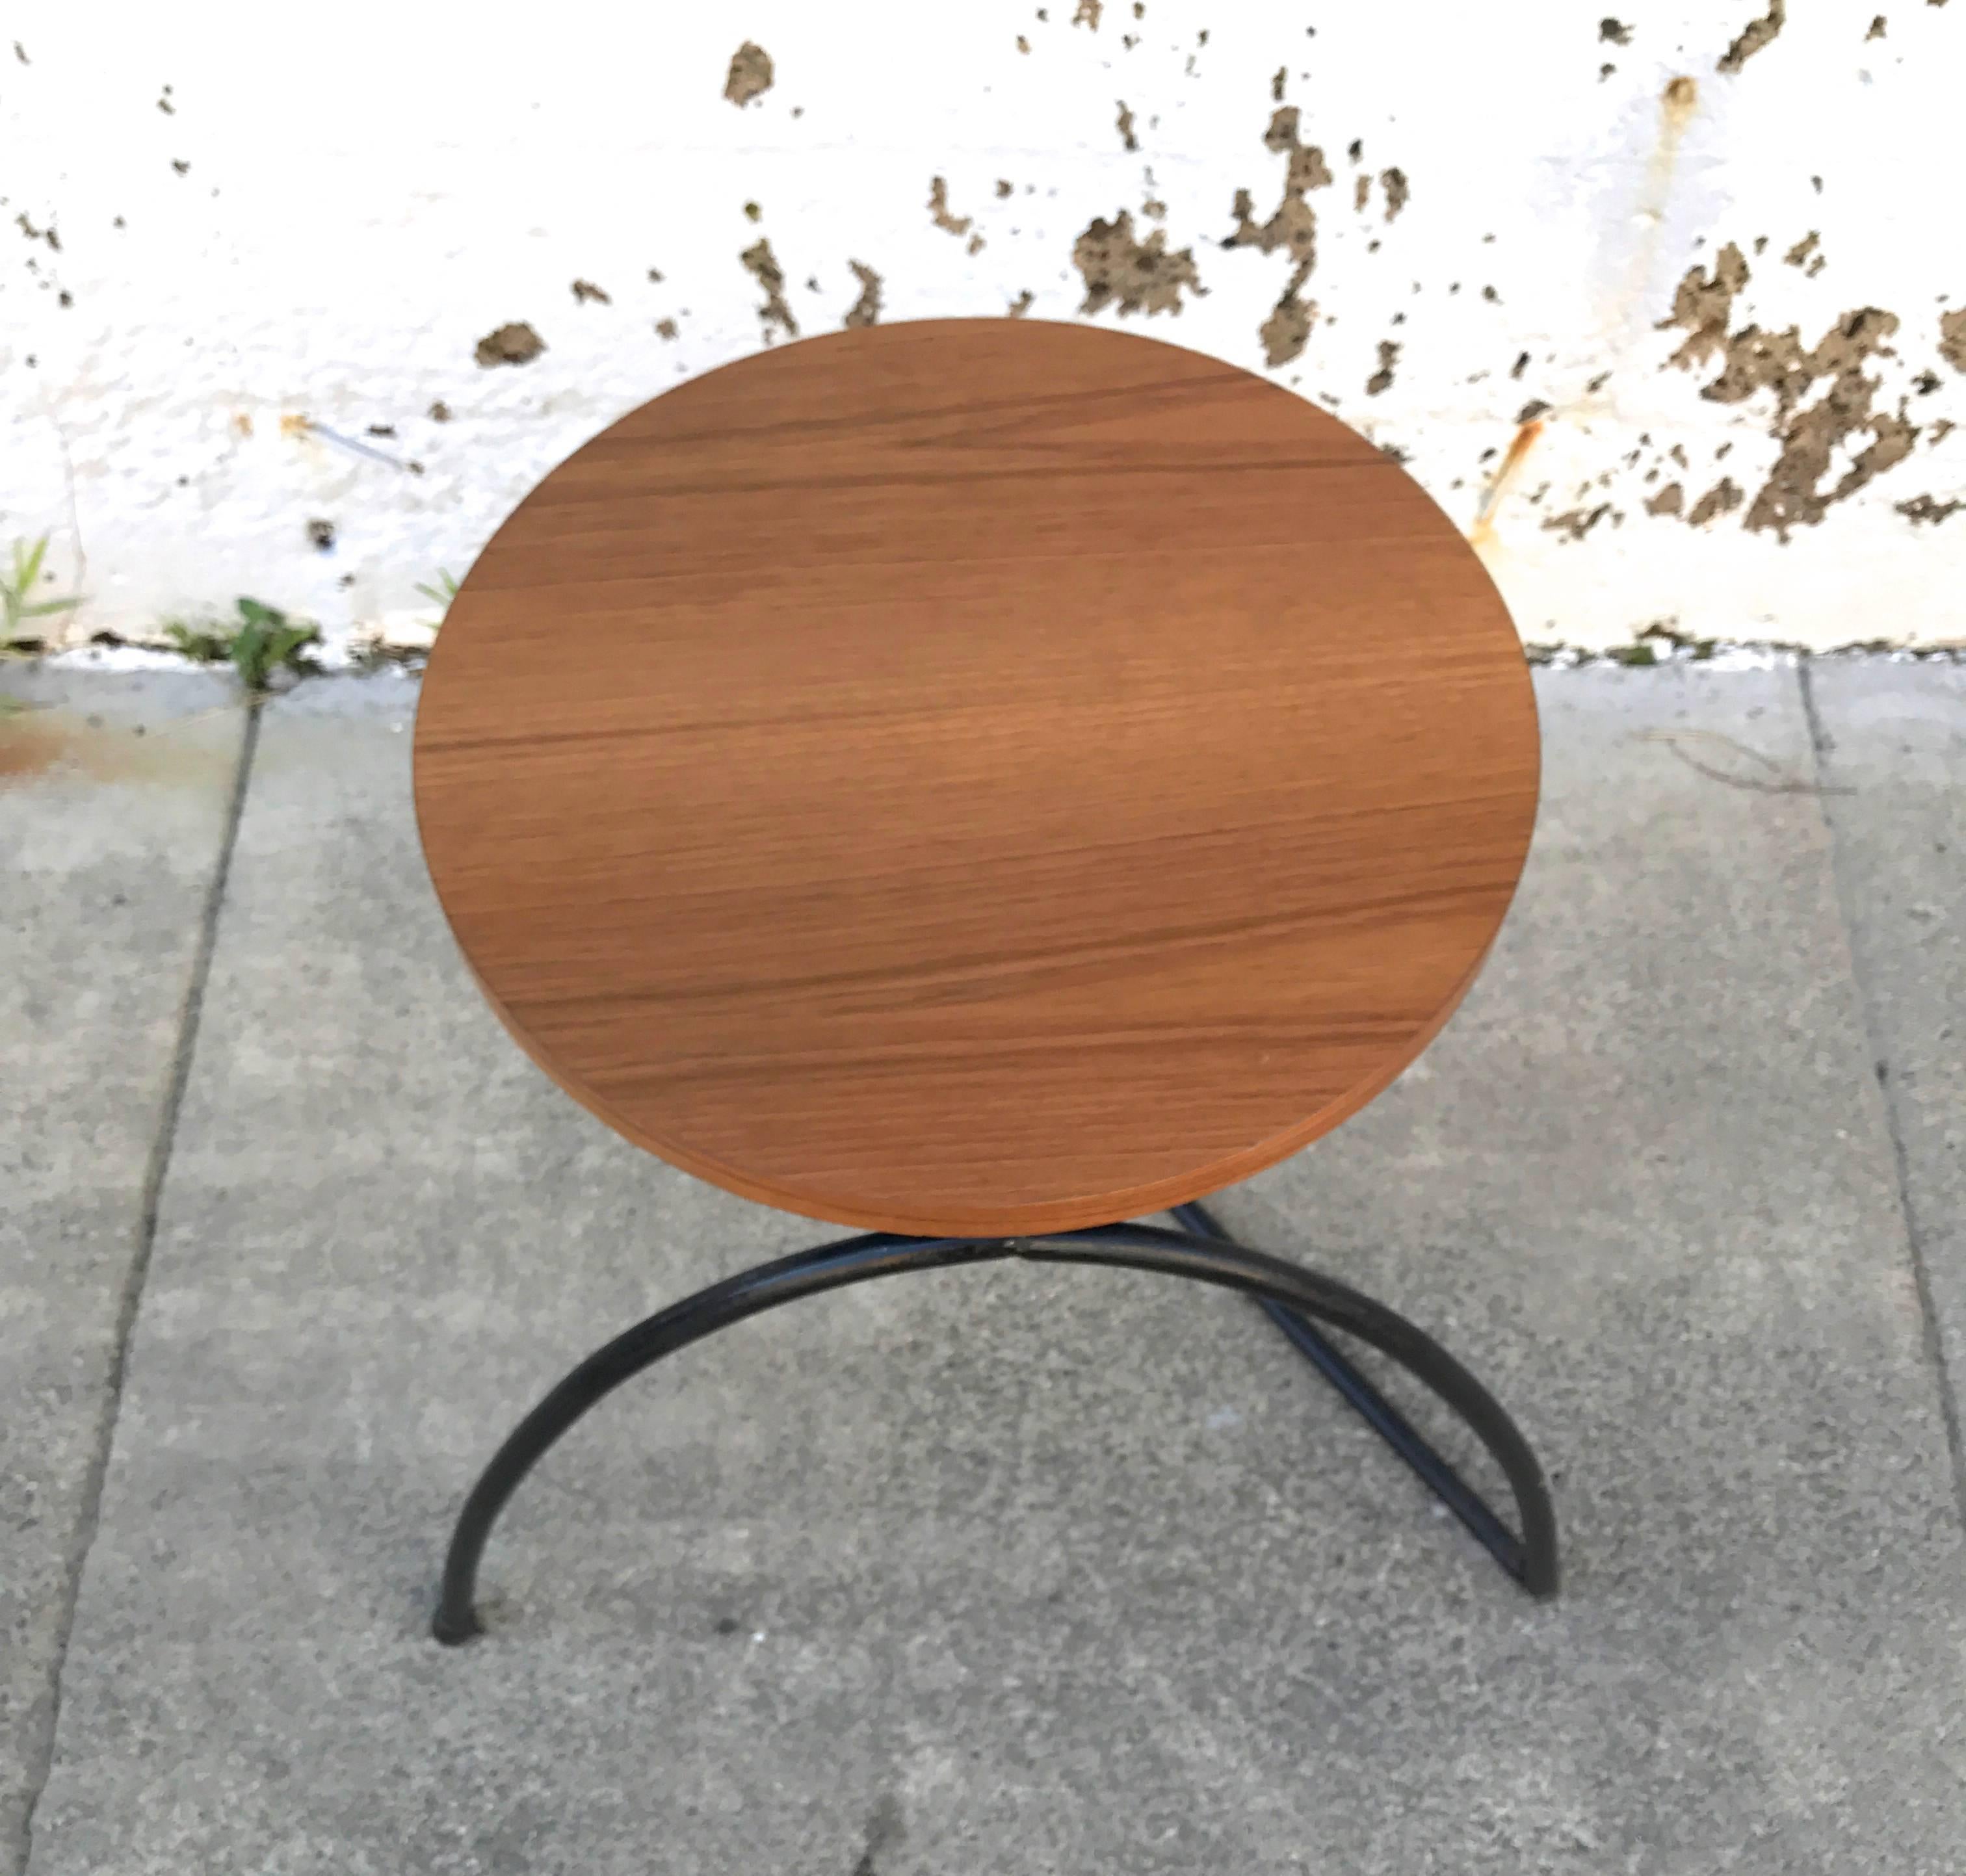 A unusual design in iron and walnut is this early 1950s Modernist stool/side table, integrating a curve and sharp angle in its base with a circular walnut top. The top has been restored and the base given a light touch up of paint. I've only seen a